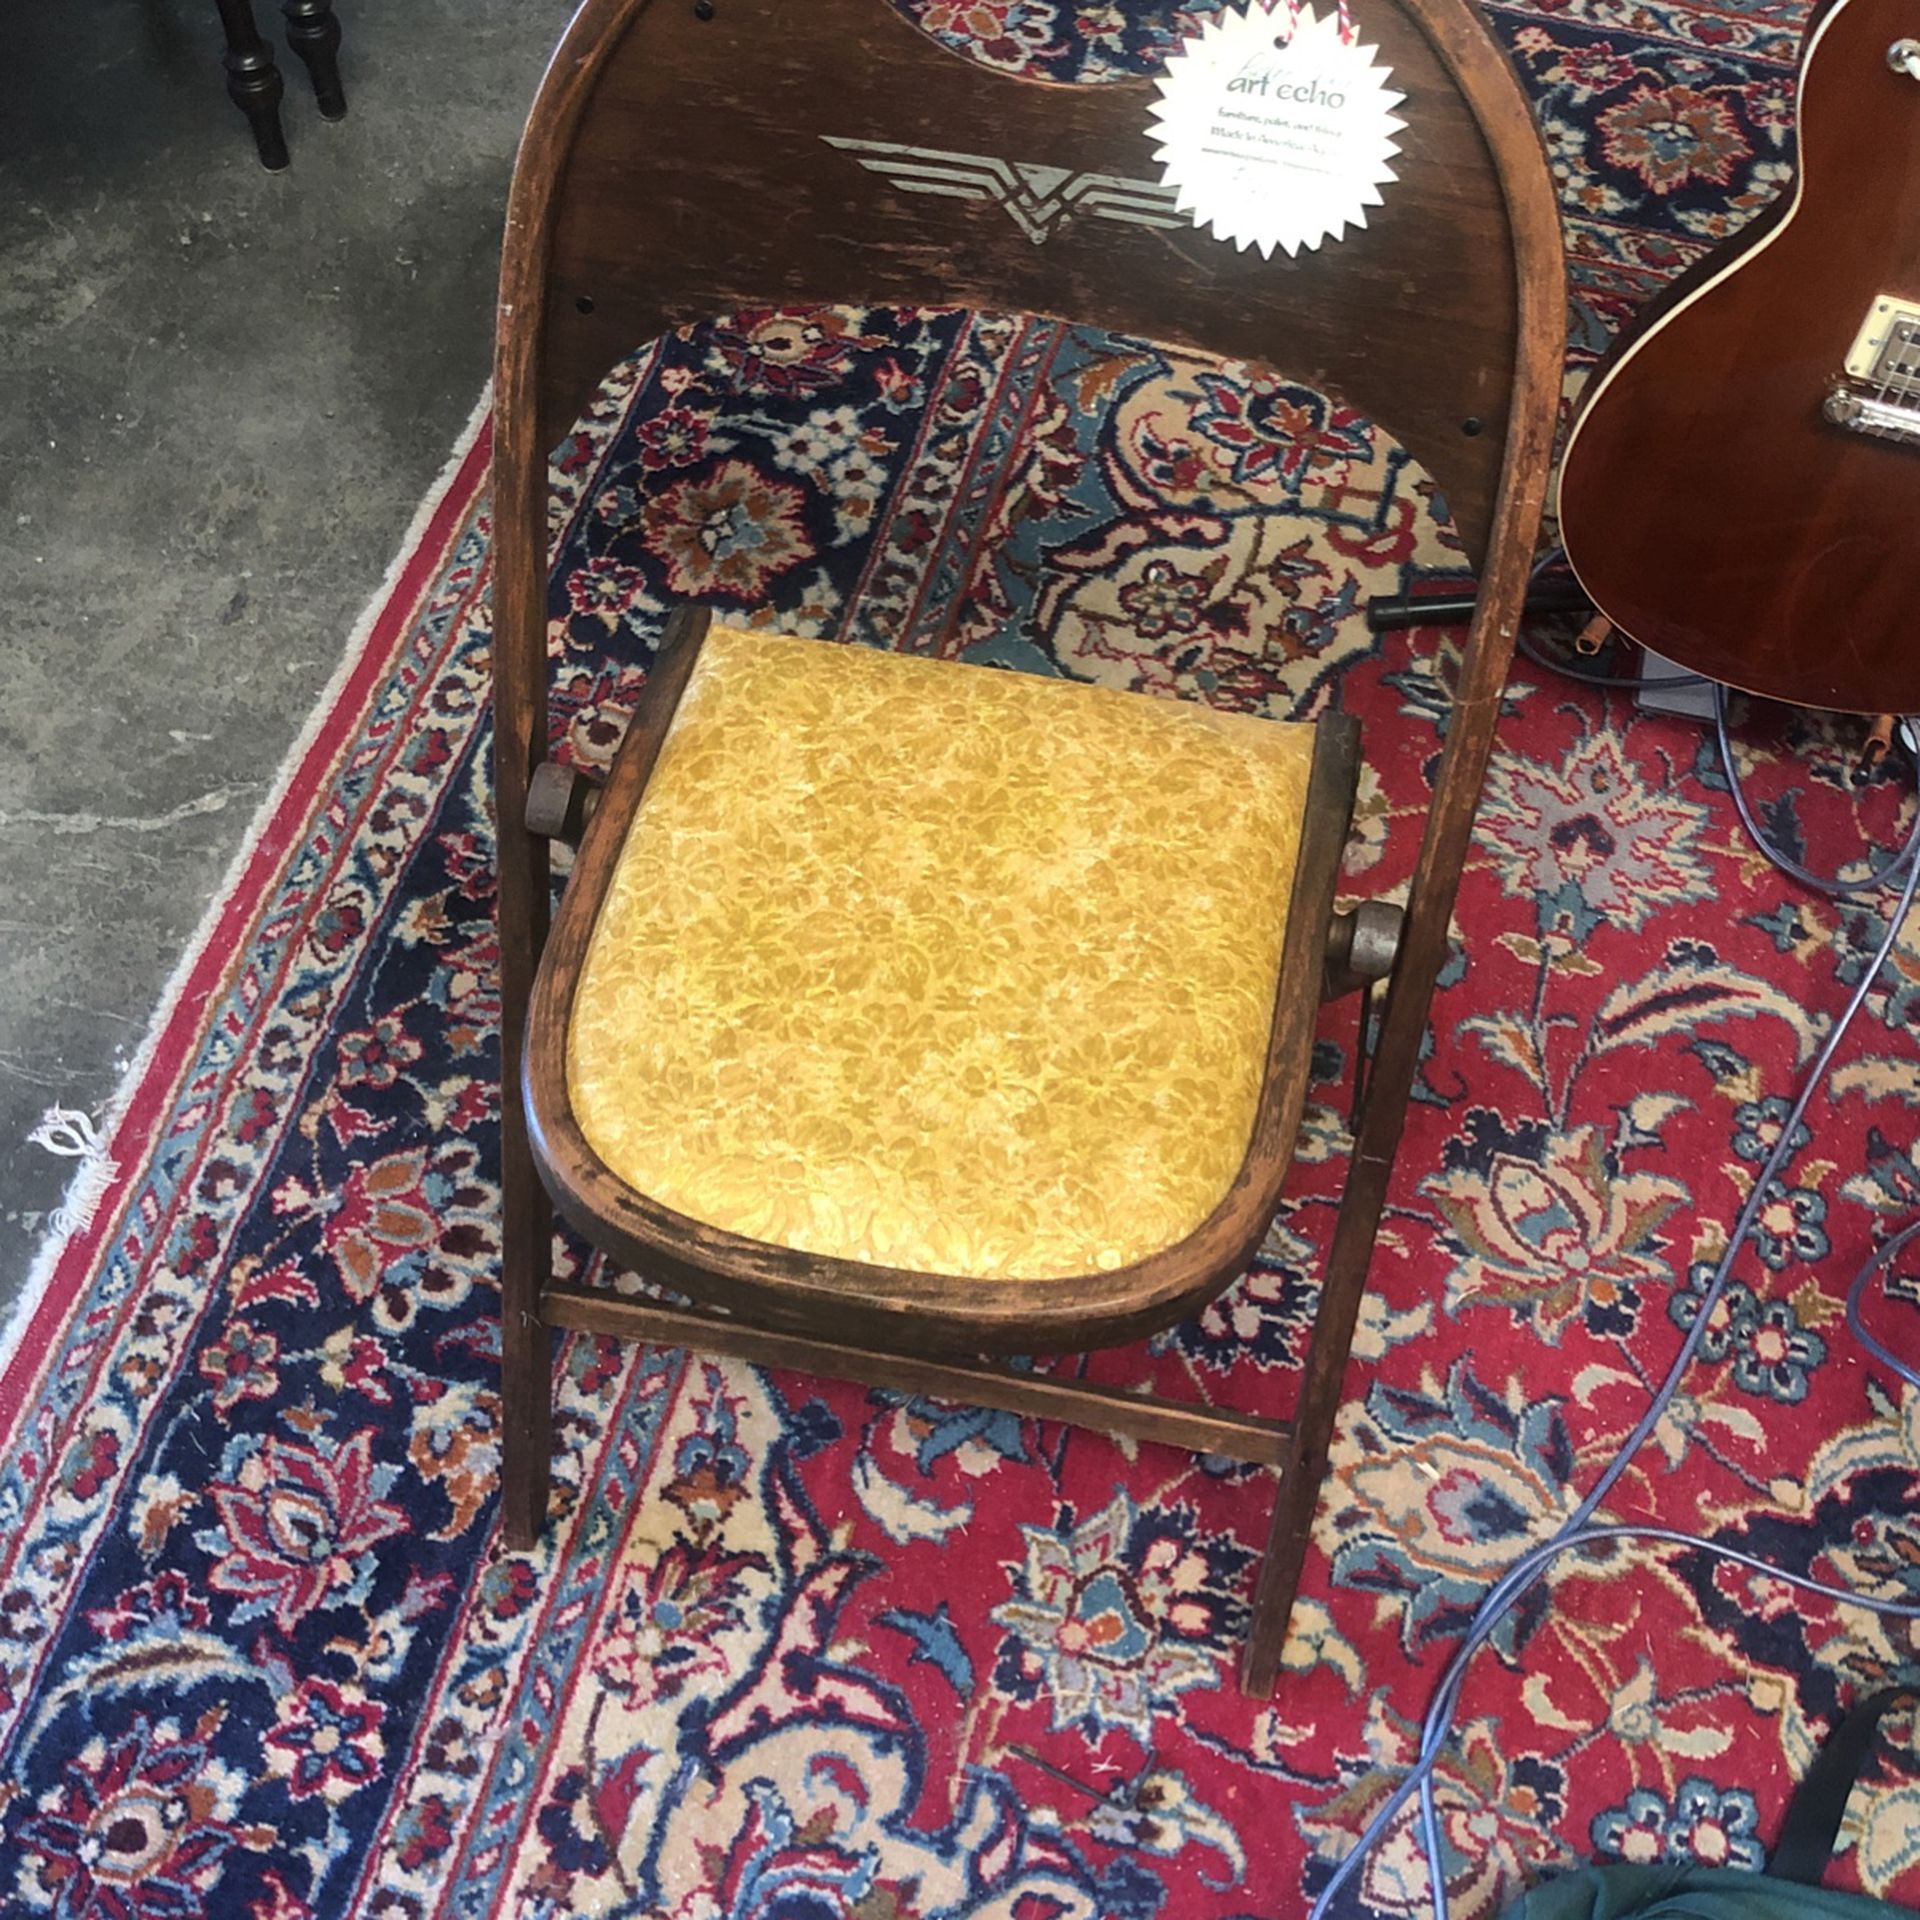 Vintage/Antique  Folding Chair ,distinctive From Brimfield Marked Down To $25 